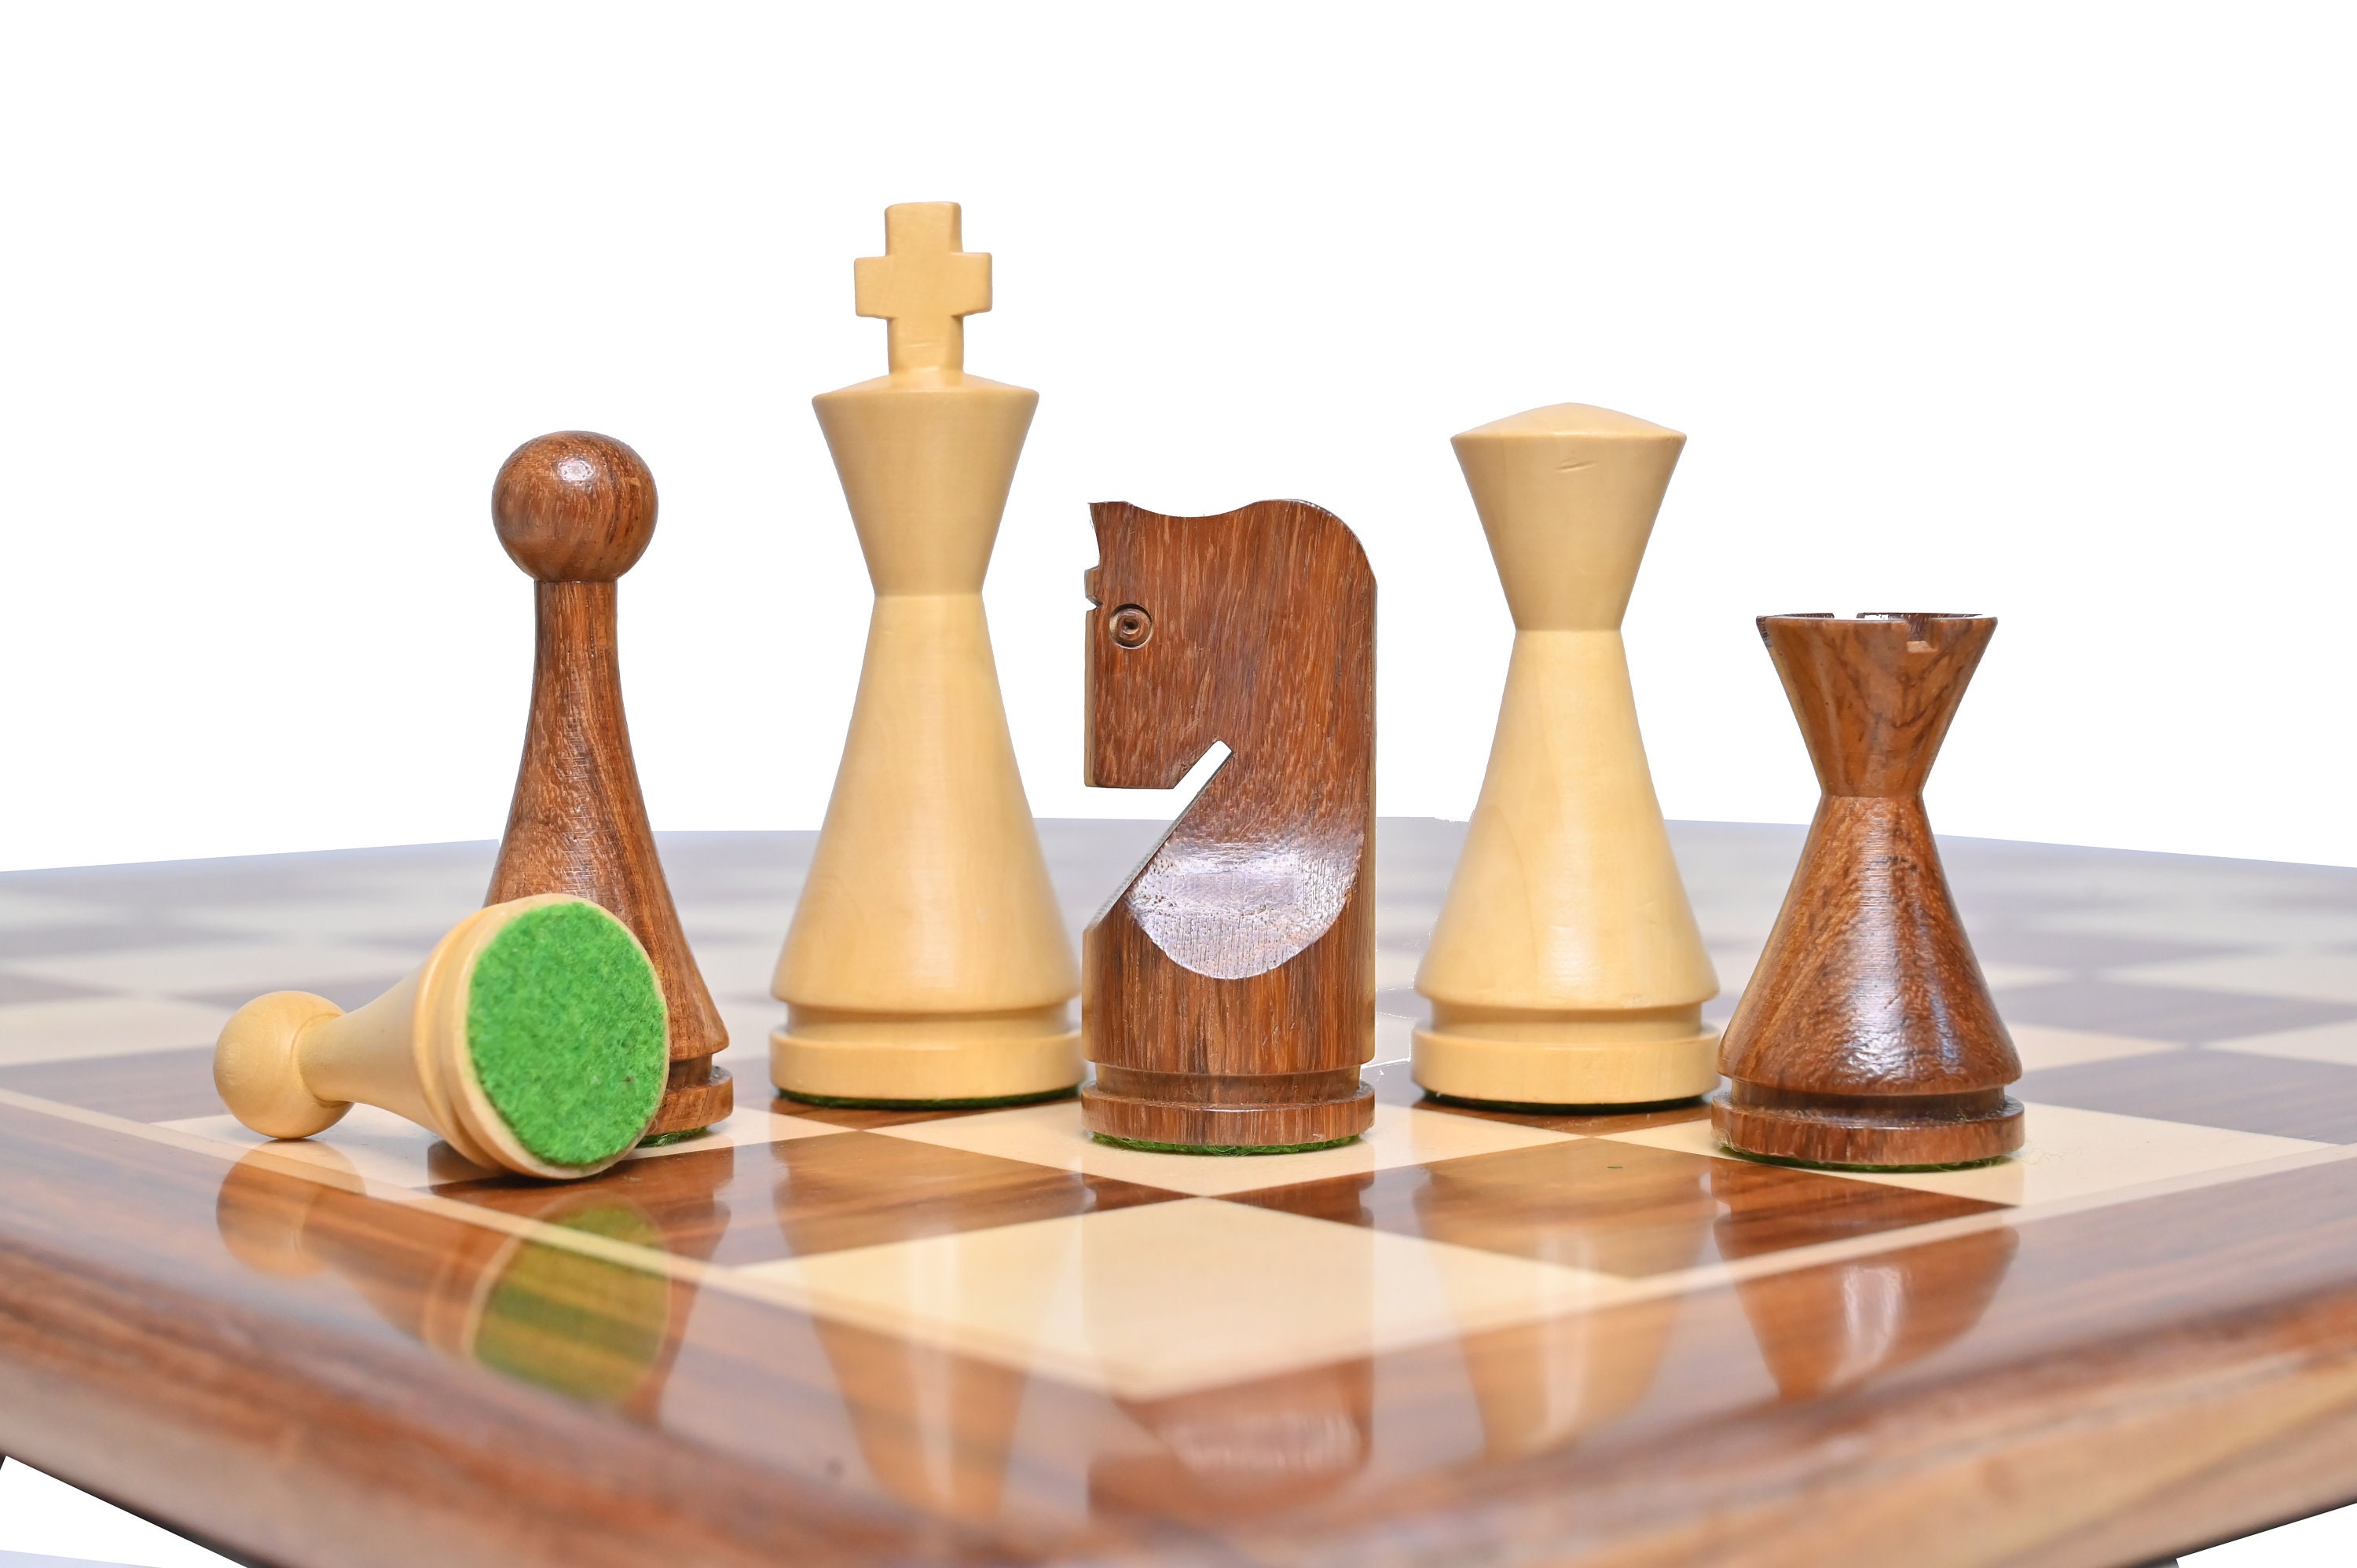 Queen's Gambit Series Final Game Chess Set with Ebonized & Boxwood